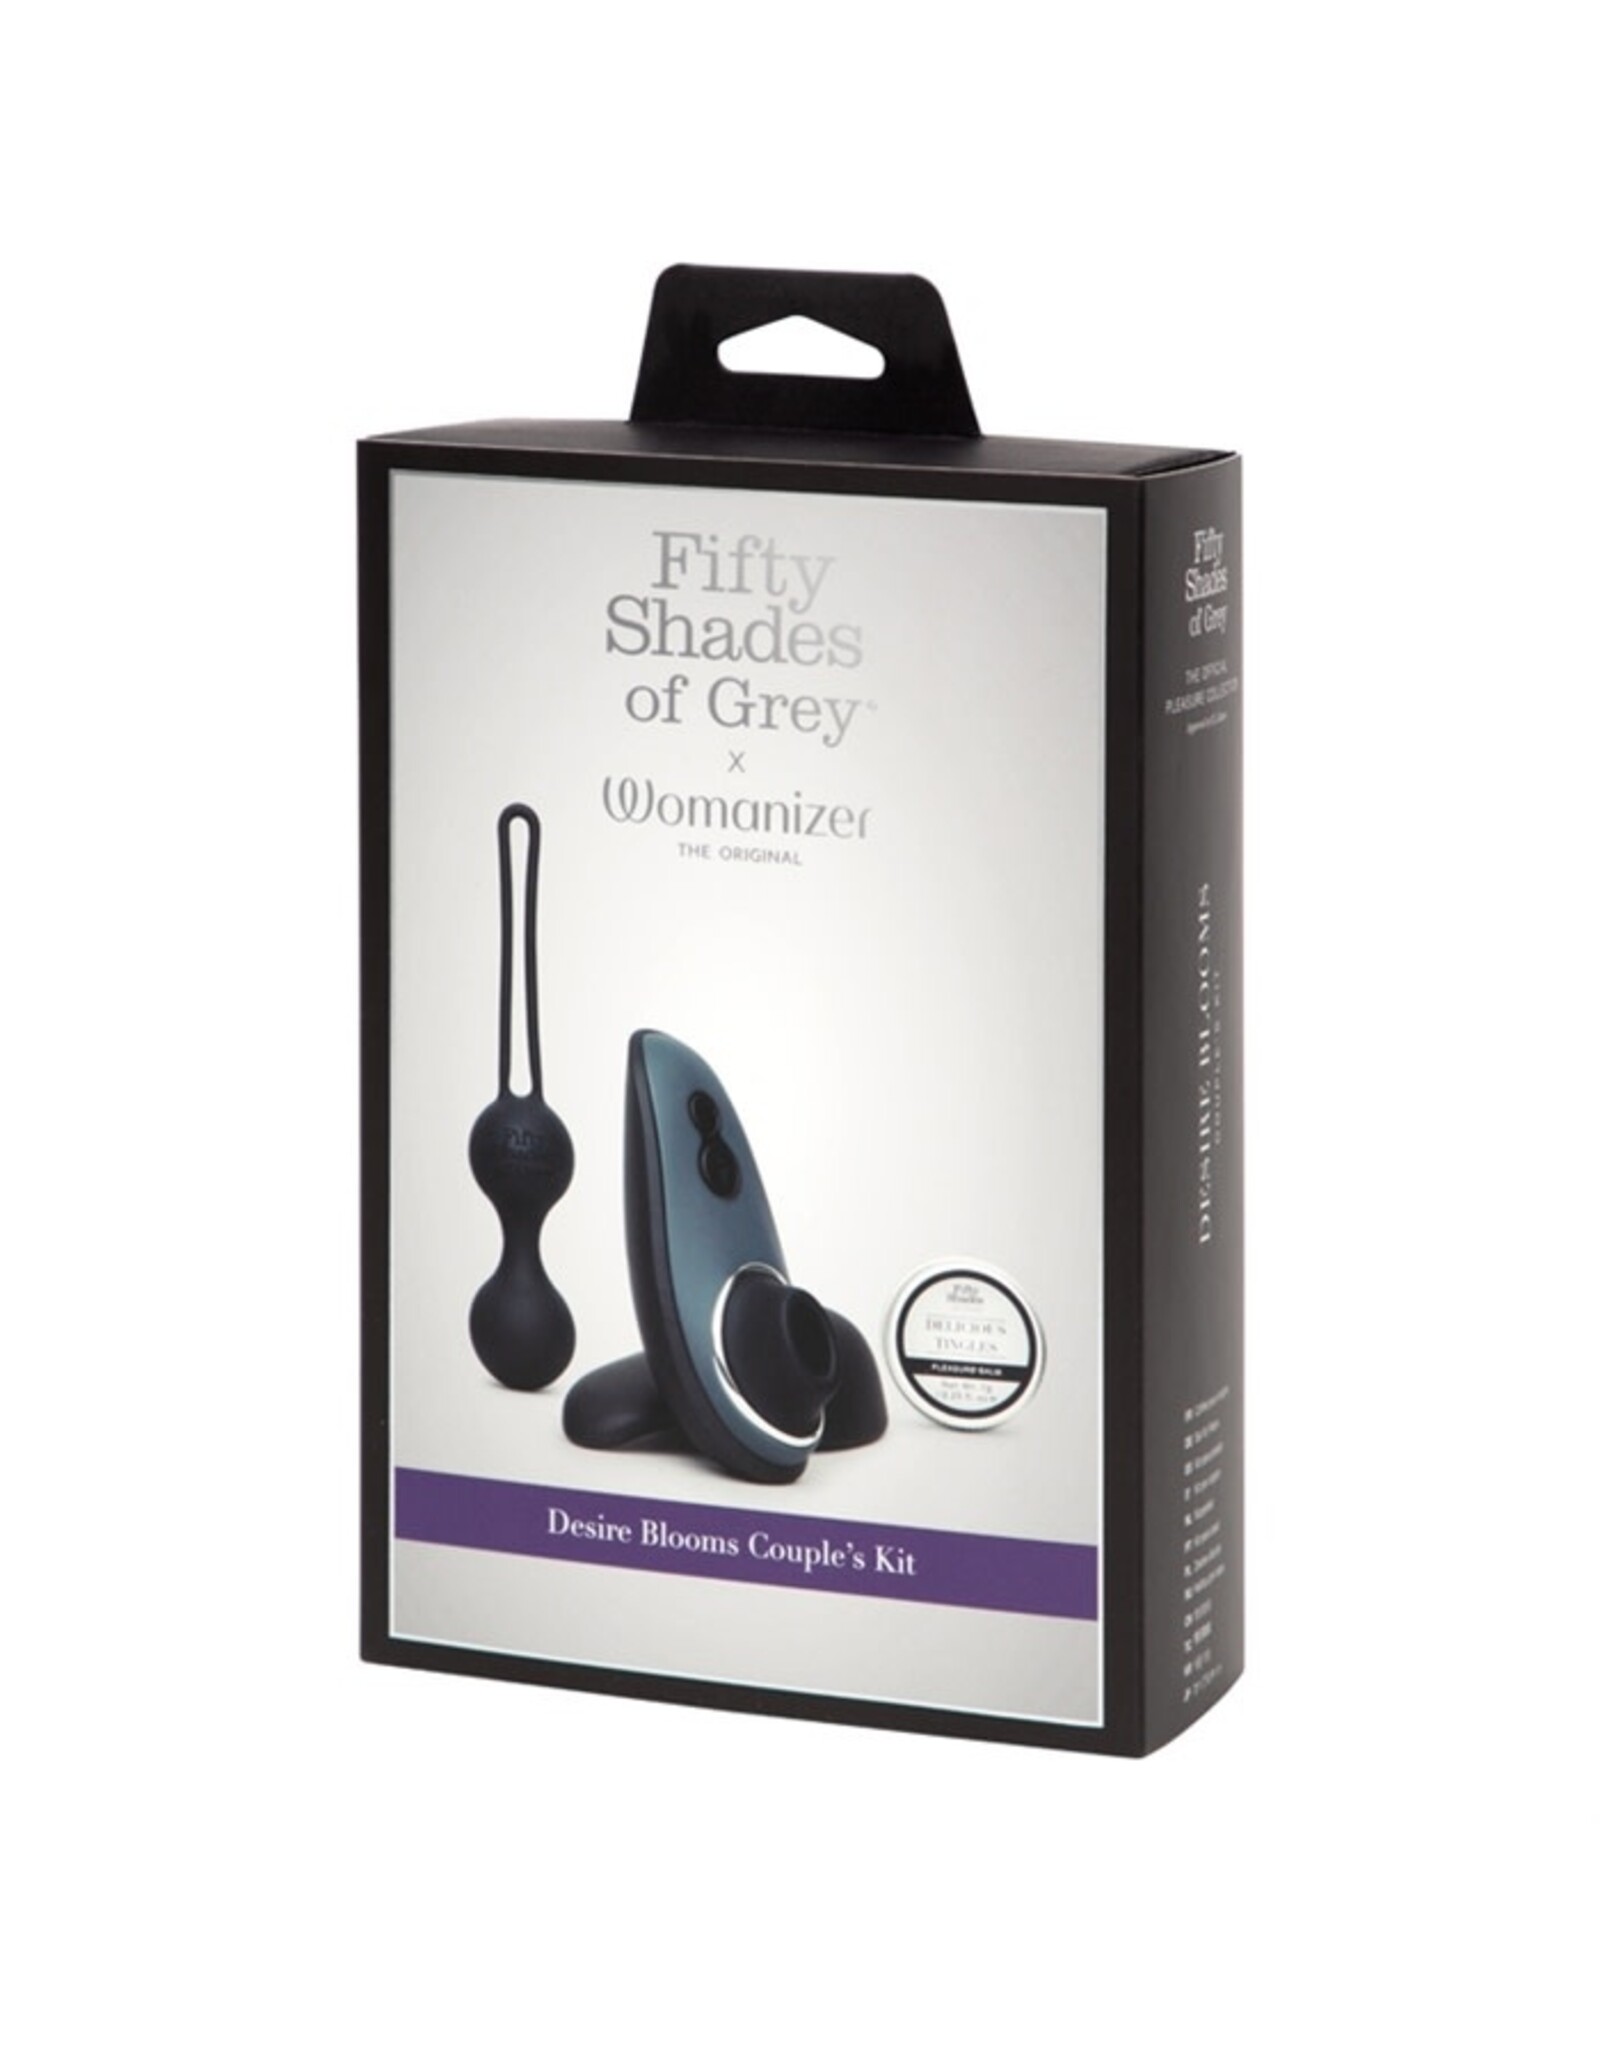 Fifty Shades - Desire Blooms Couple's Kit